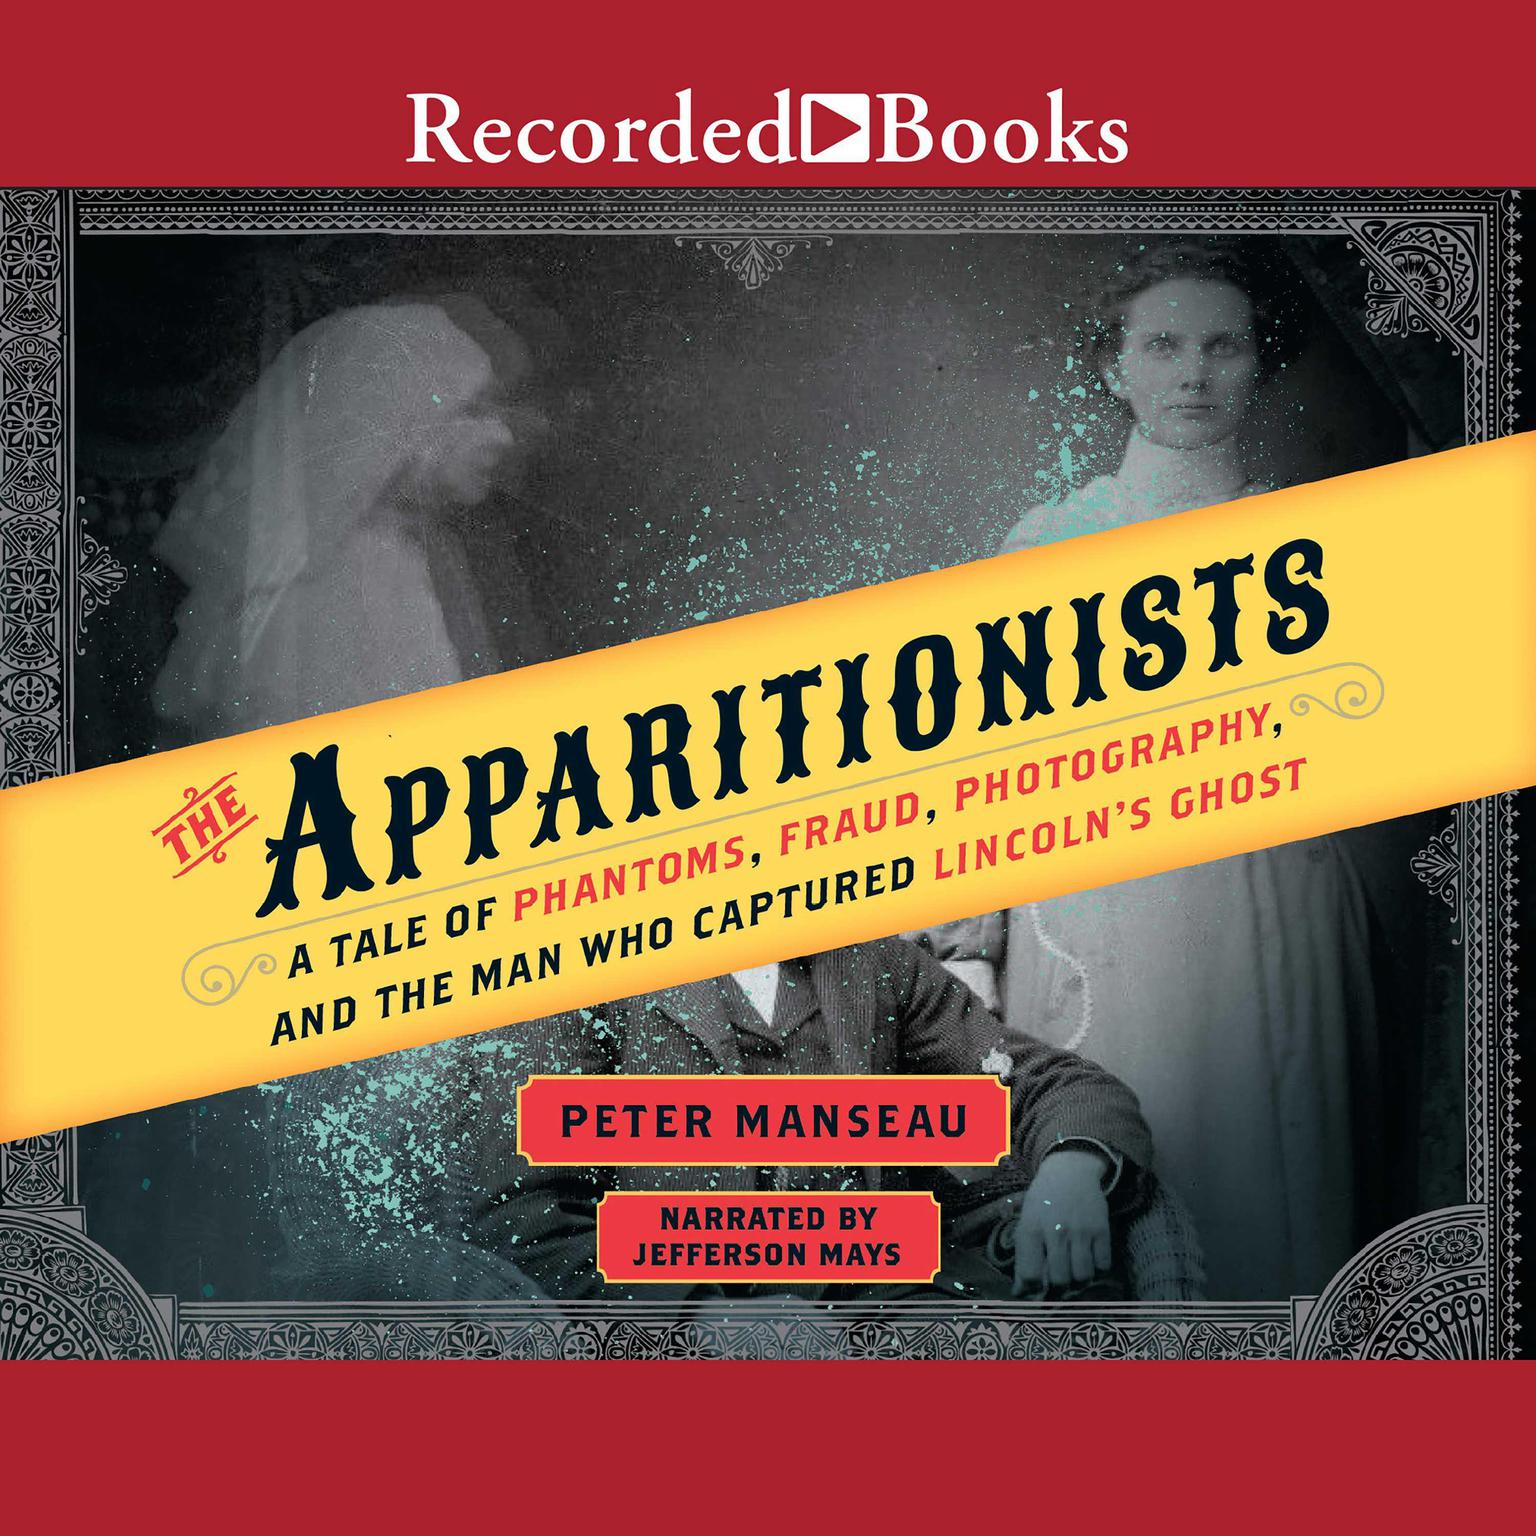 The Apparitionists: A Tale of Phantoms, Fraud, Photography, and the Man Who Captured Lincolns Ghost Audiobook, by Peter Manseau